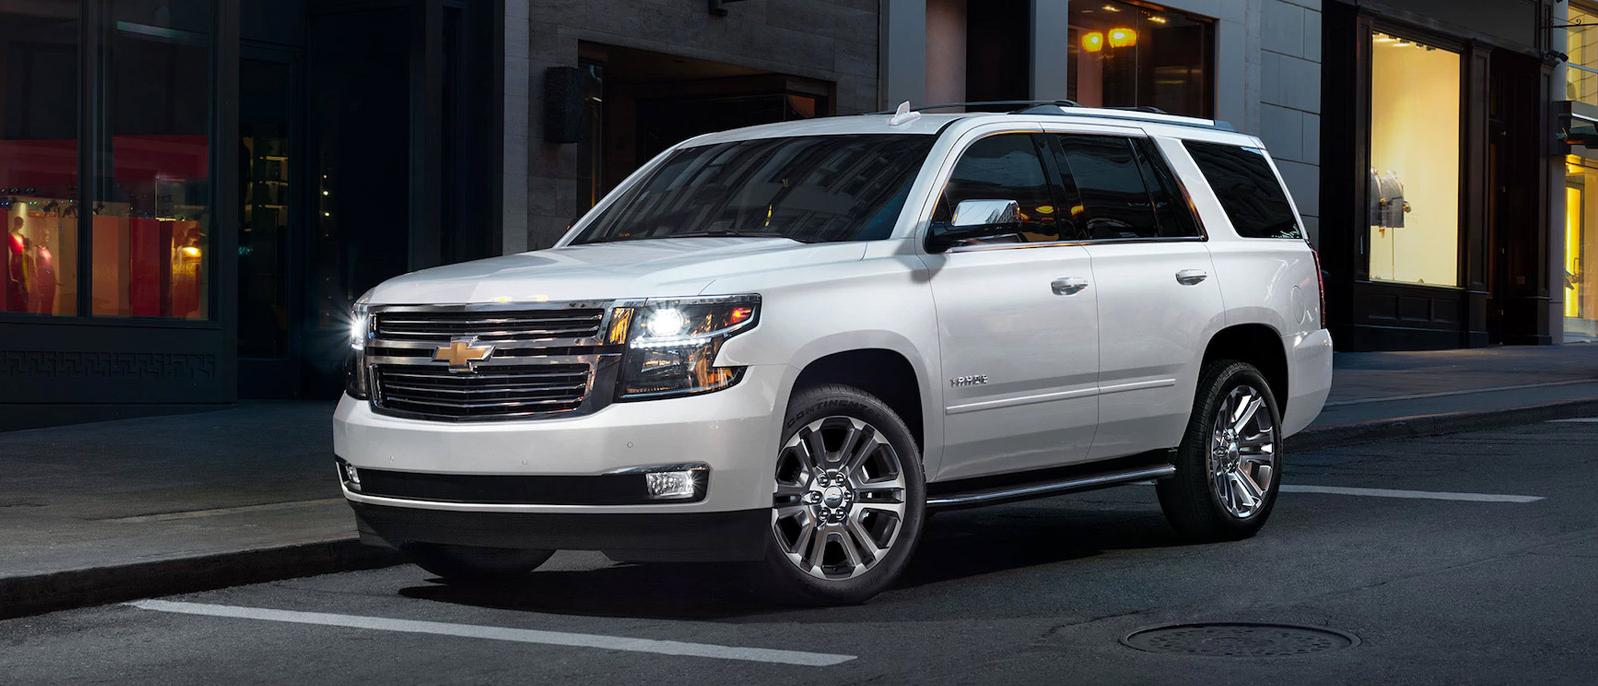 New Chevy Tahoe SUVs for Sale in Princeton MN | Princeton Auto Center